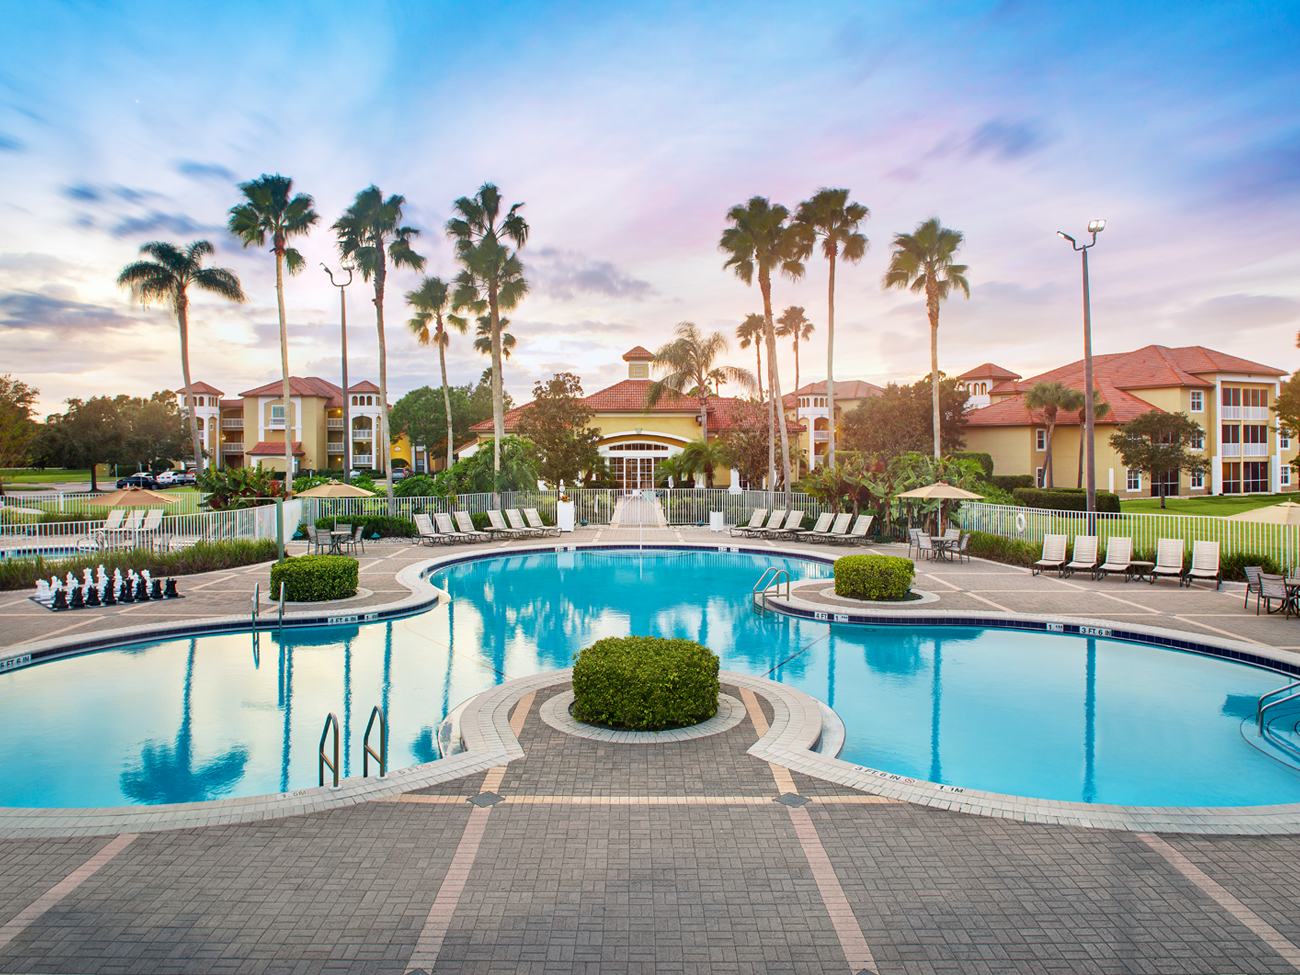 Image of Sheraton PGA Vacation Resort in Port St. Lucie.